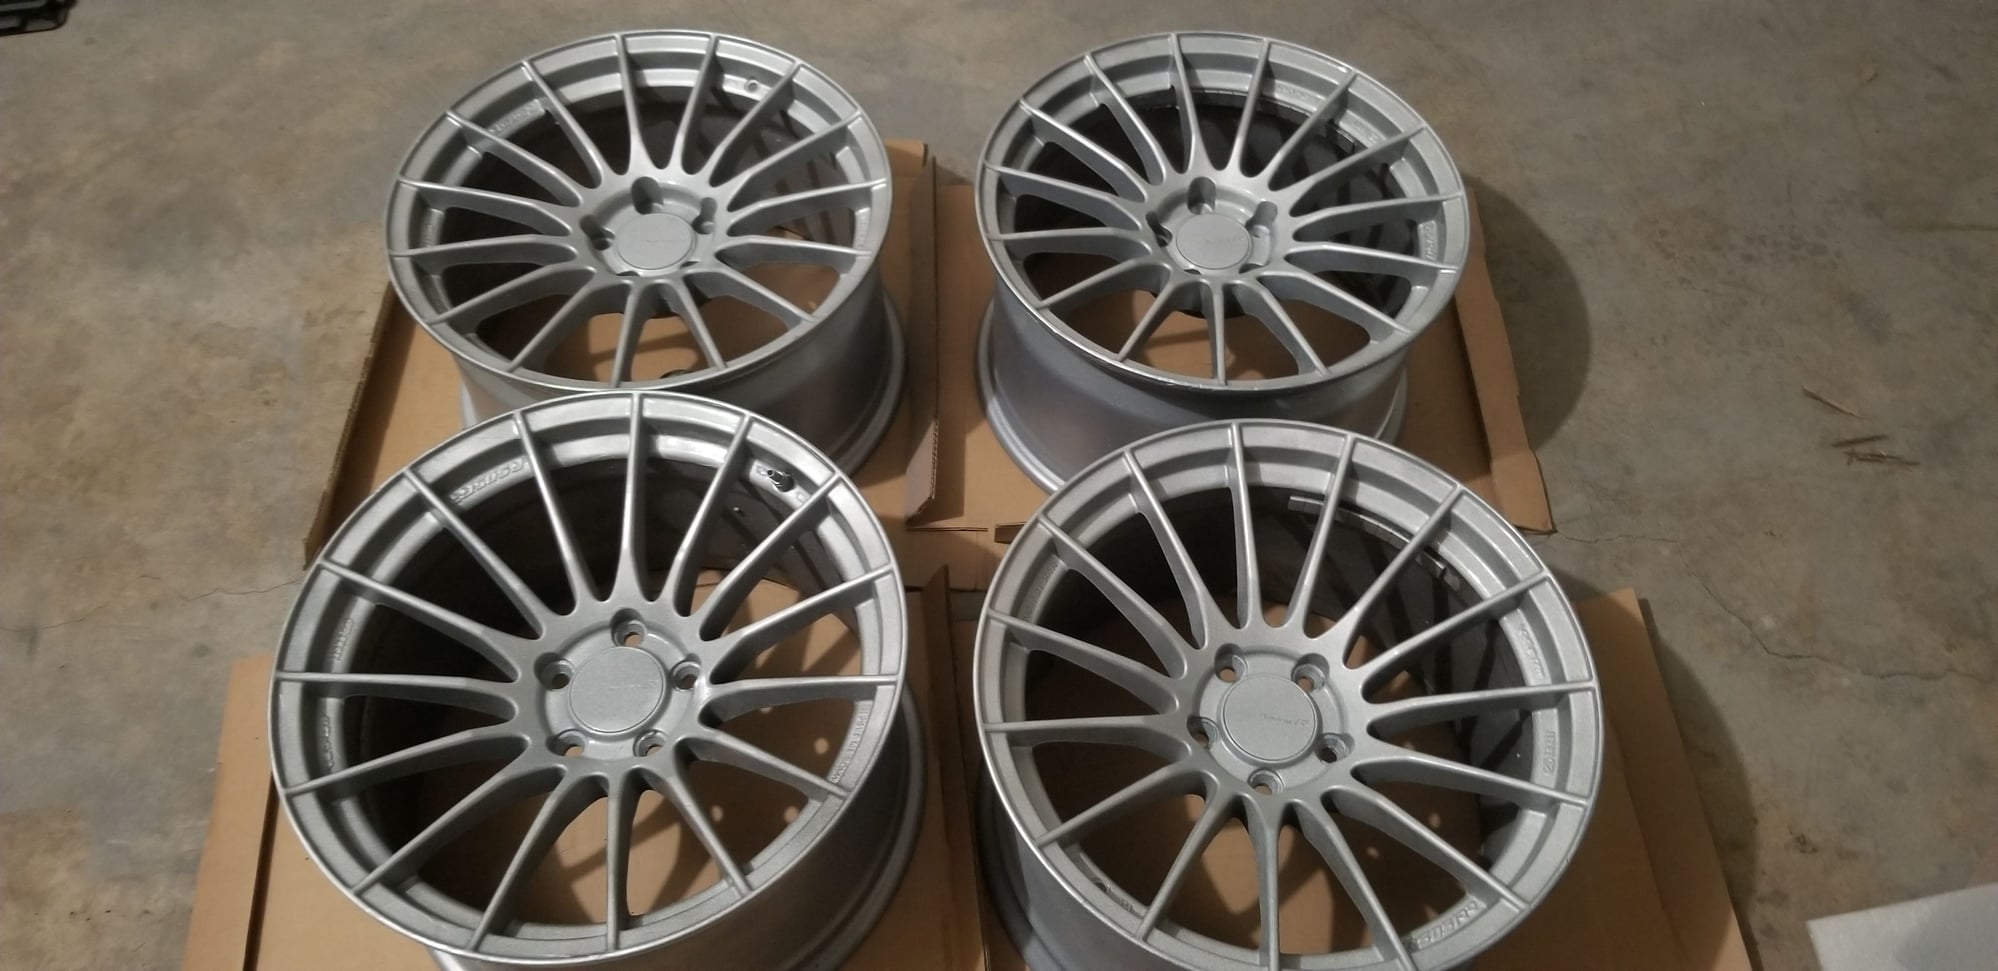 Wheels and Tires/Axles - Enkei rs05rr Wheels for sale - Used - 2006 to 2013 Lexus IS250 - Dublin, OH 43017, United States